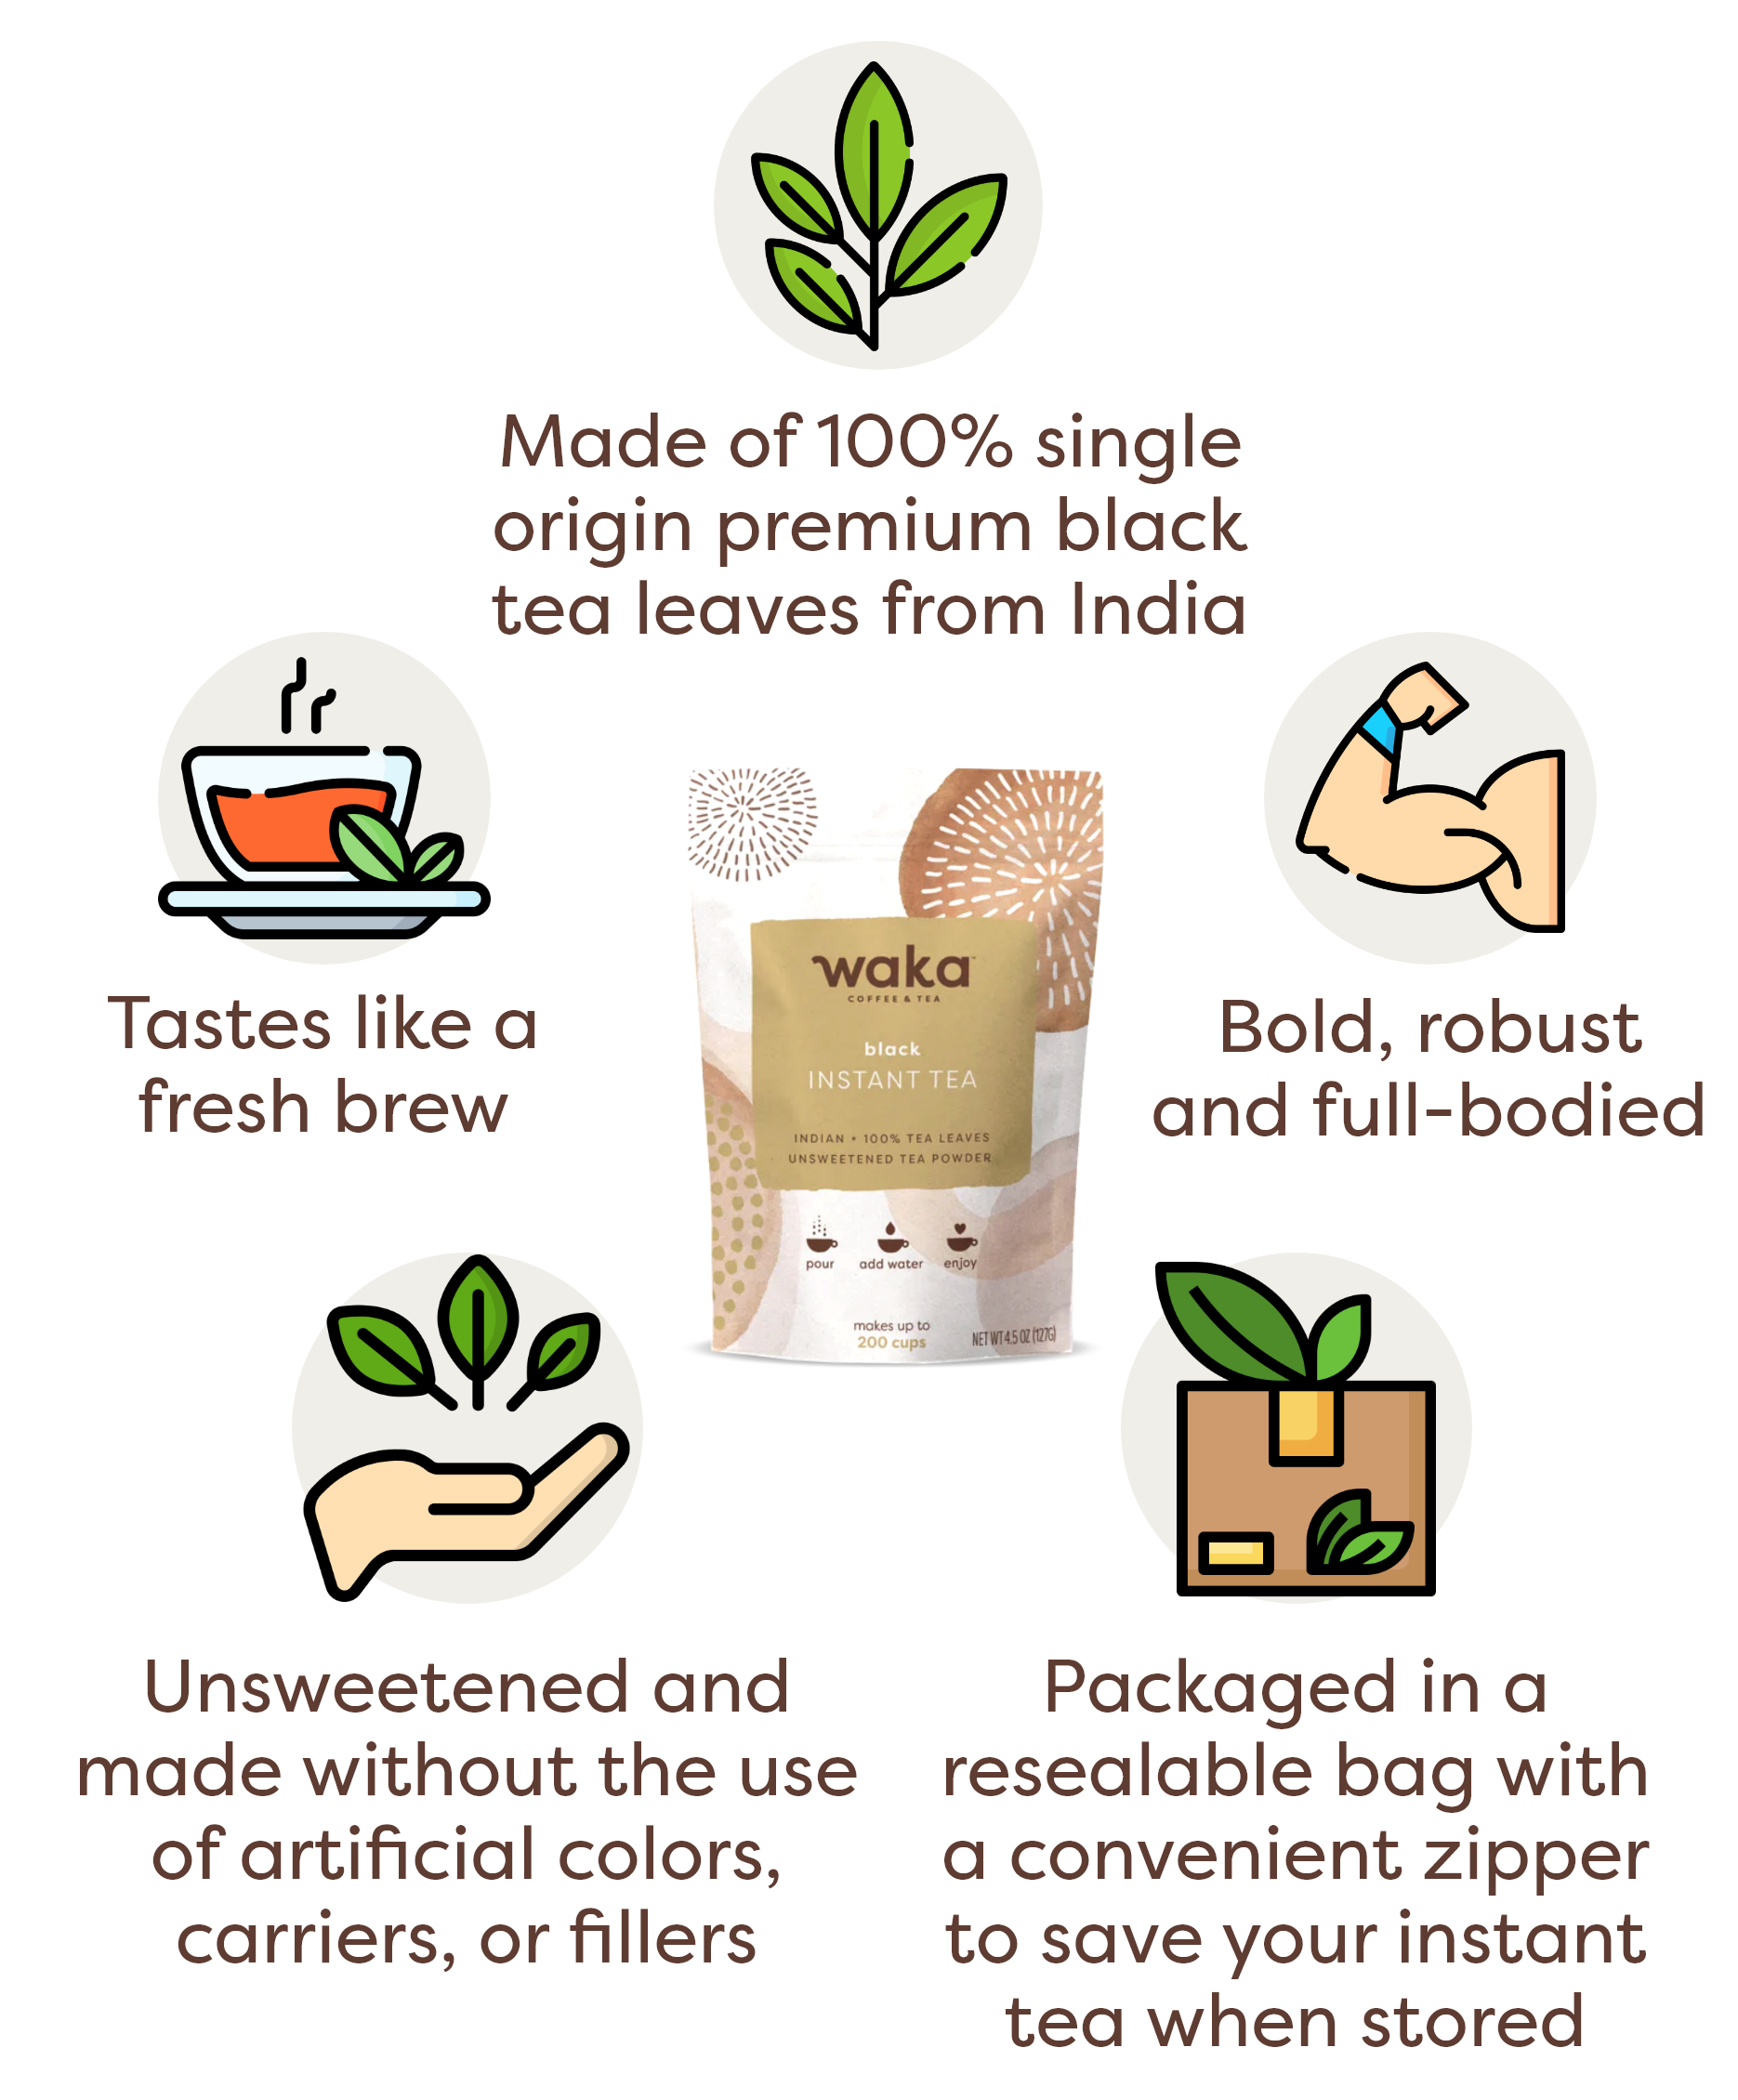 Made of 100% single origin premium black tea leaves from India. Unsweetened and made without the use of artificial colors, carriers, or fillers. Tastes like a fresh brew. Bold, robust and full-bodied. Packaged in a resealable bag with a convenient zipper to save your instant tea when stored.